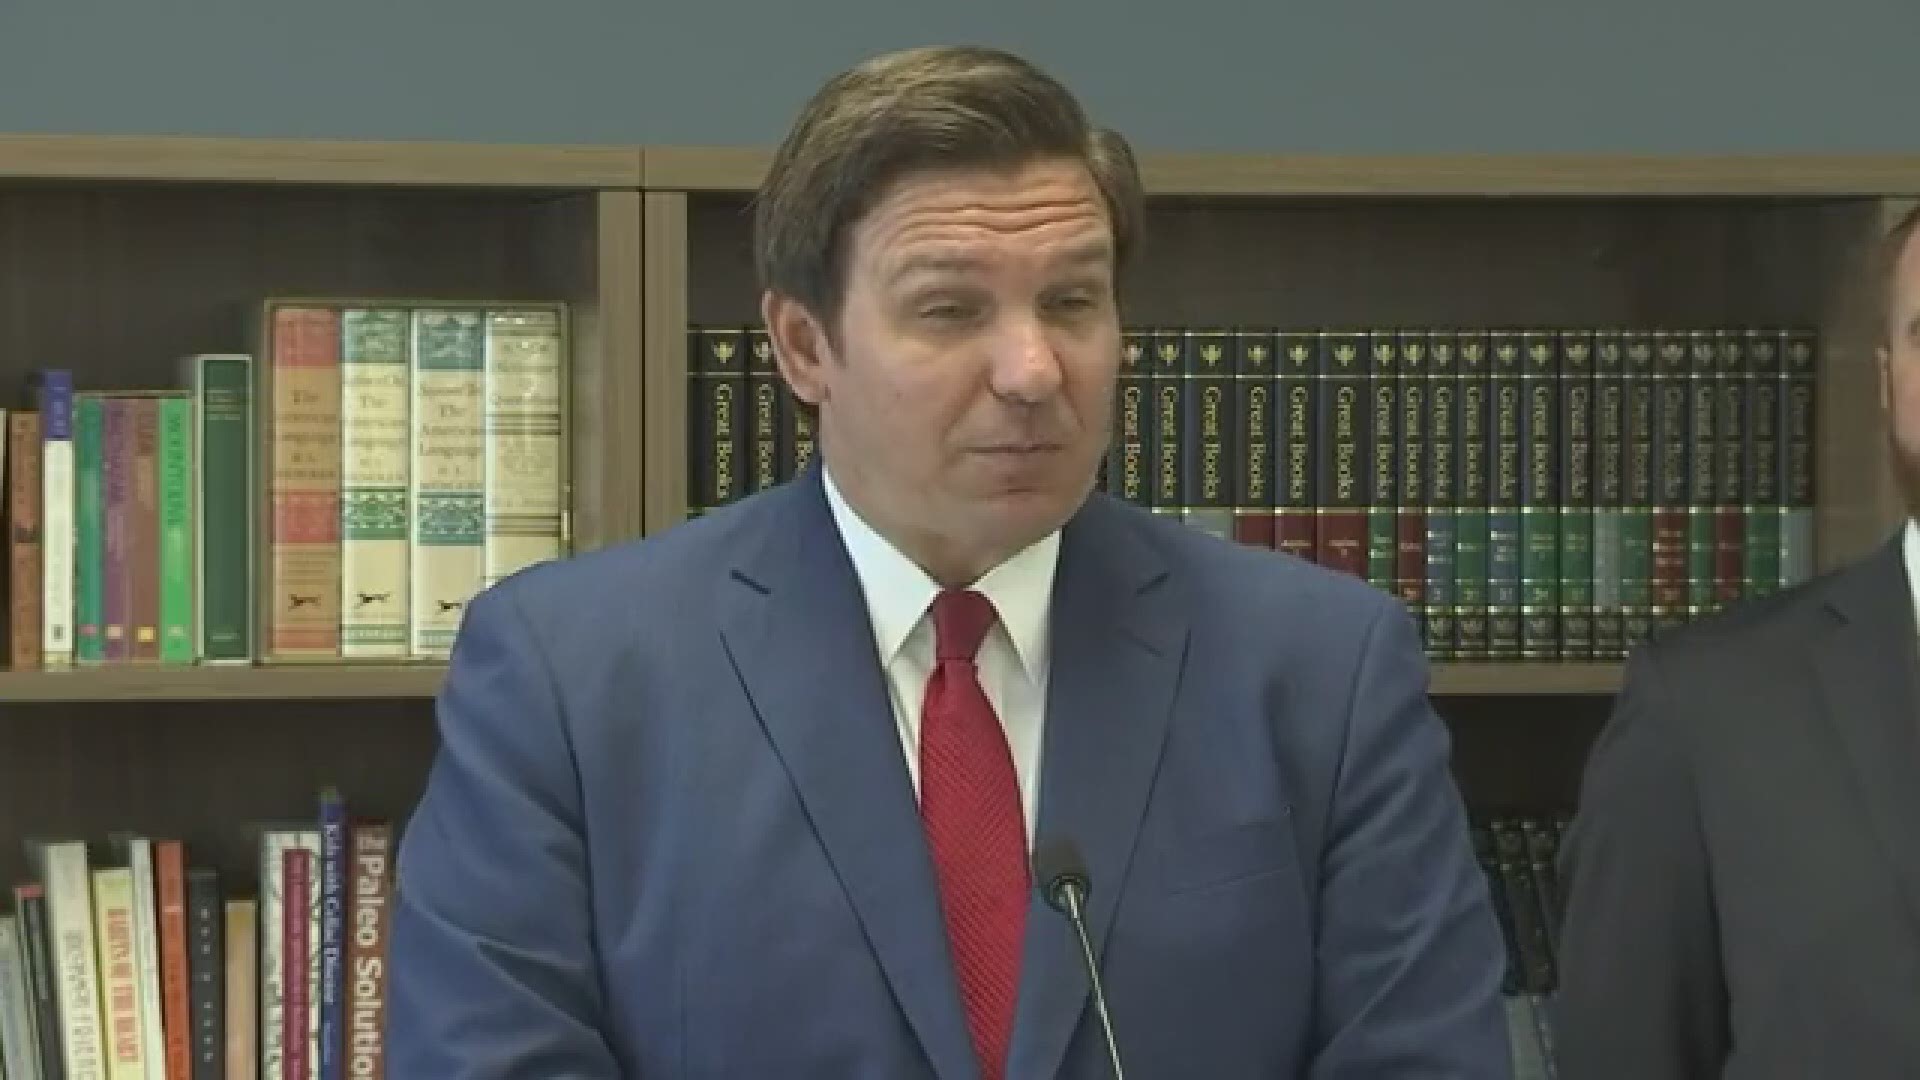 He may have been on the other side of the state, but Florida Gov. Ron DeSantis made sure to give Tampa Bay a shout-out while speaking Tuesday in Jacksonville.